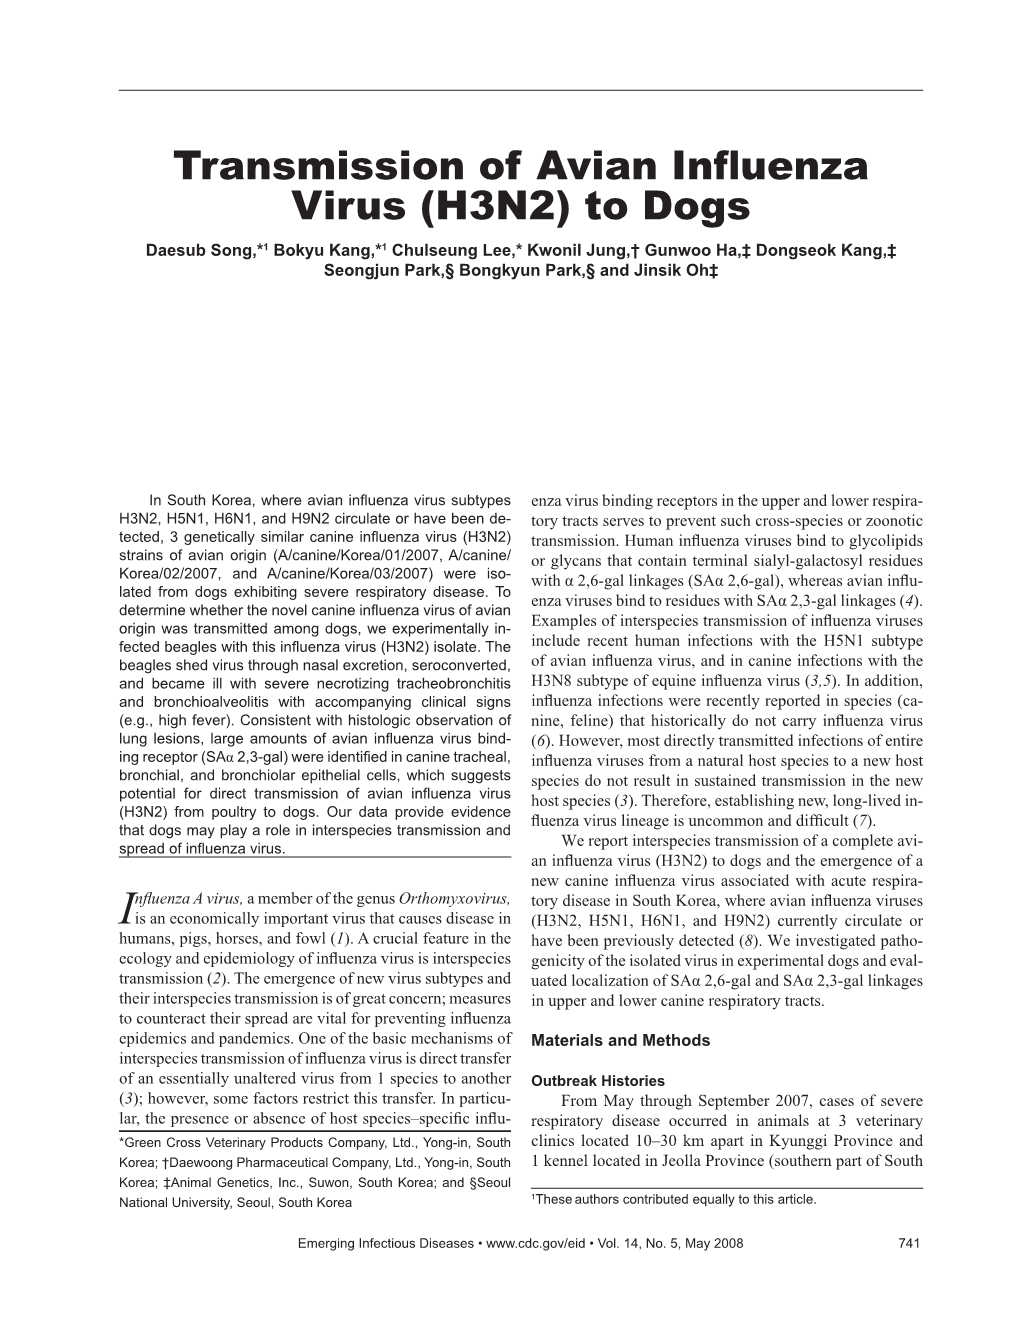 Transmission of Avian Influenza Virus (H3N2) to Dogs